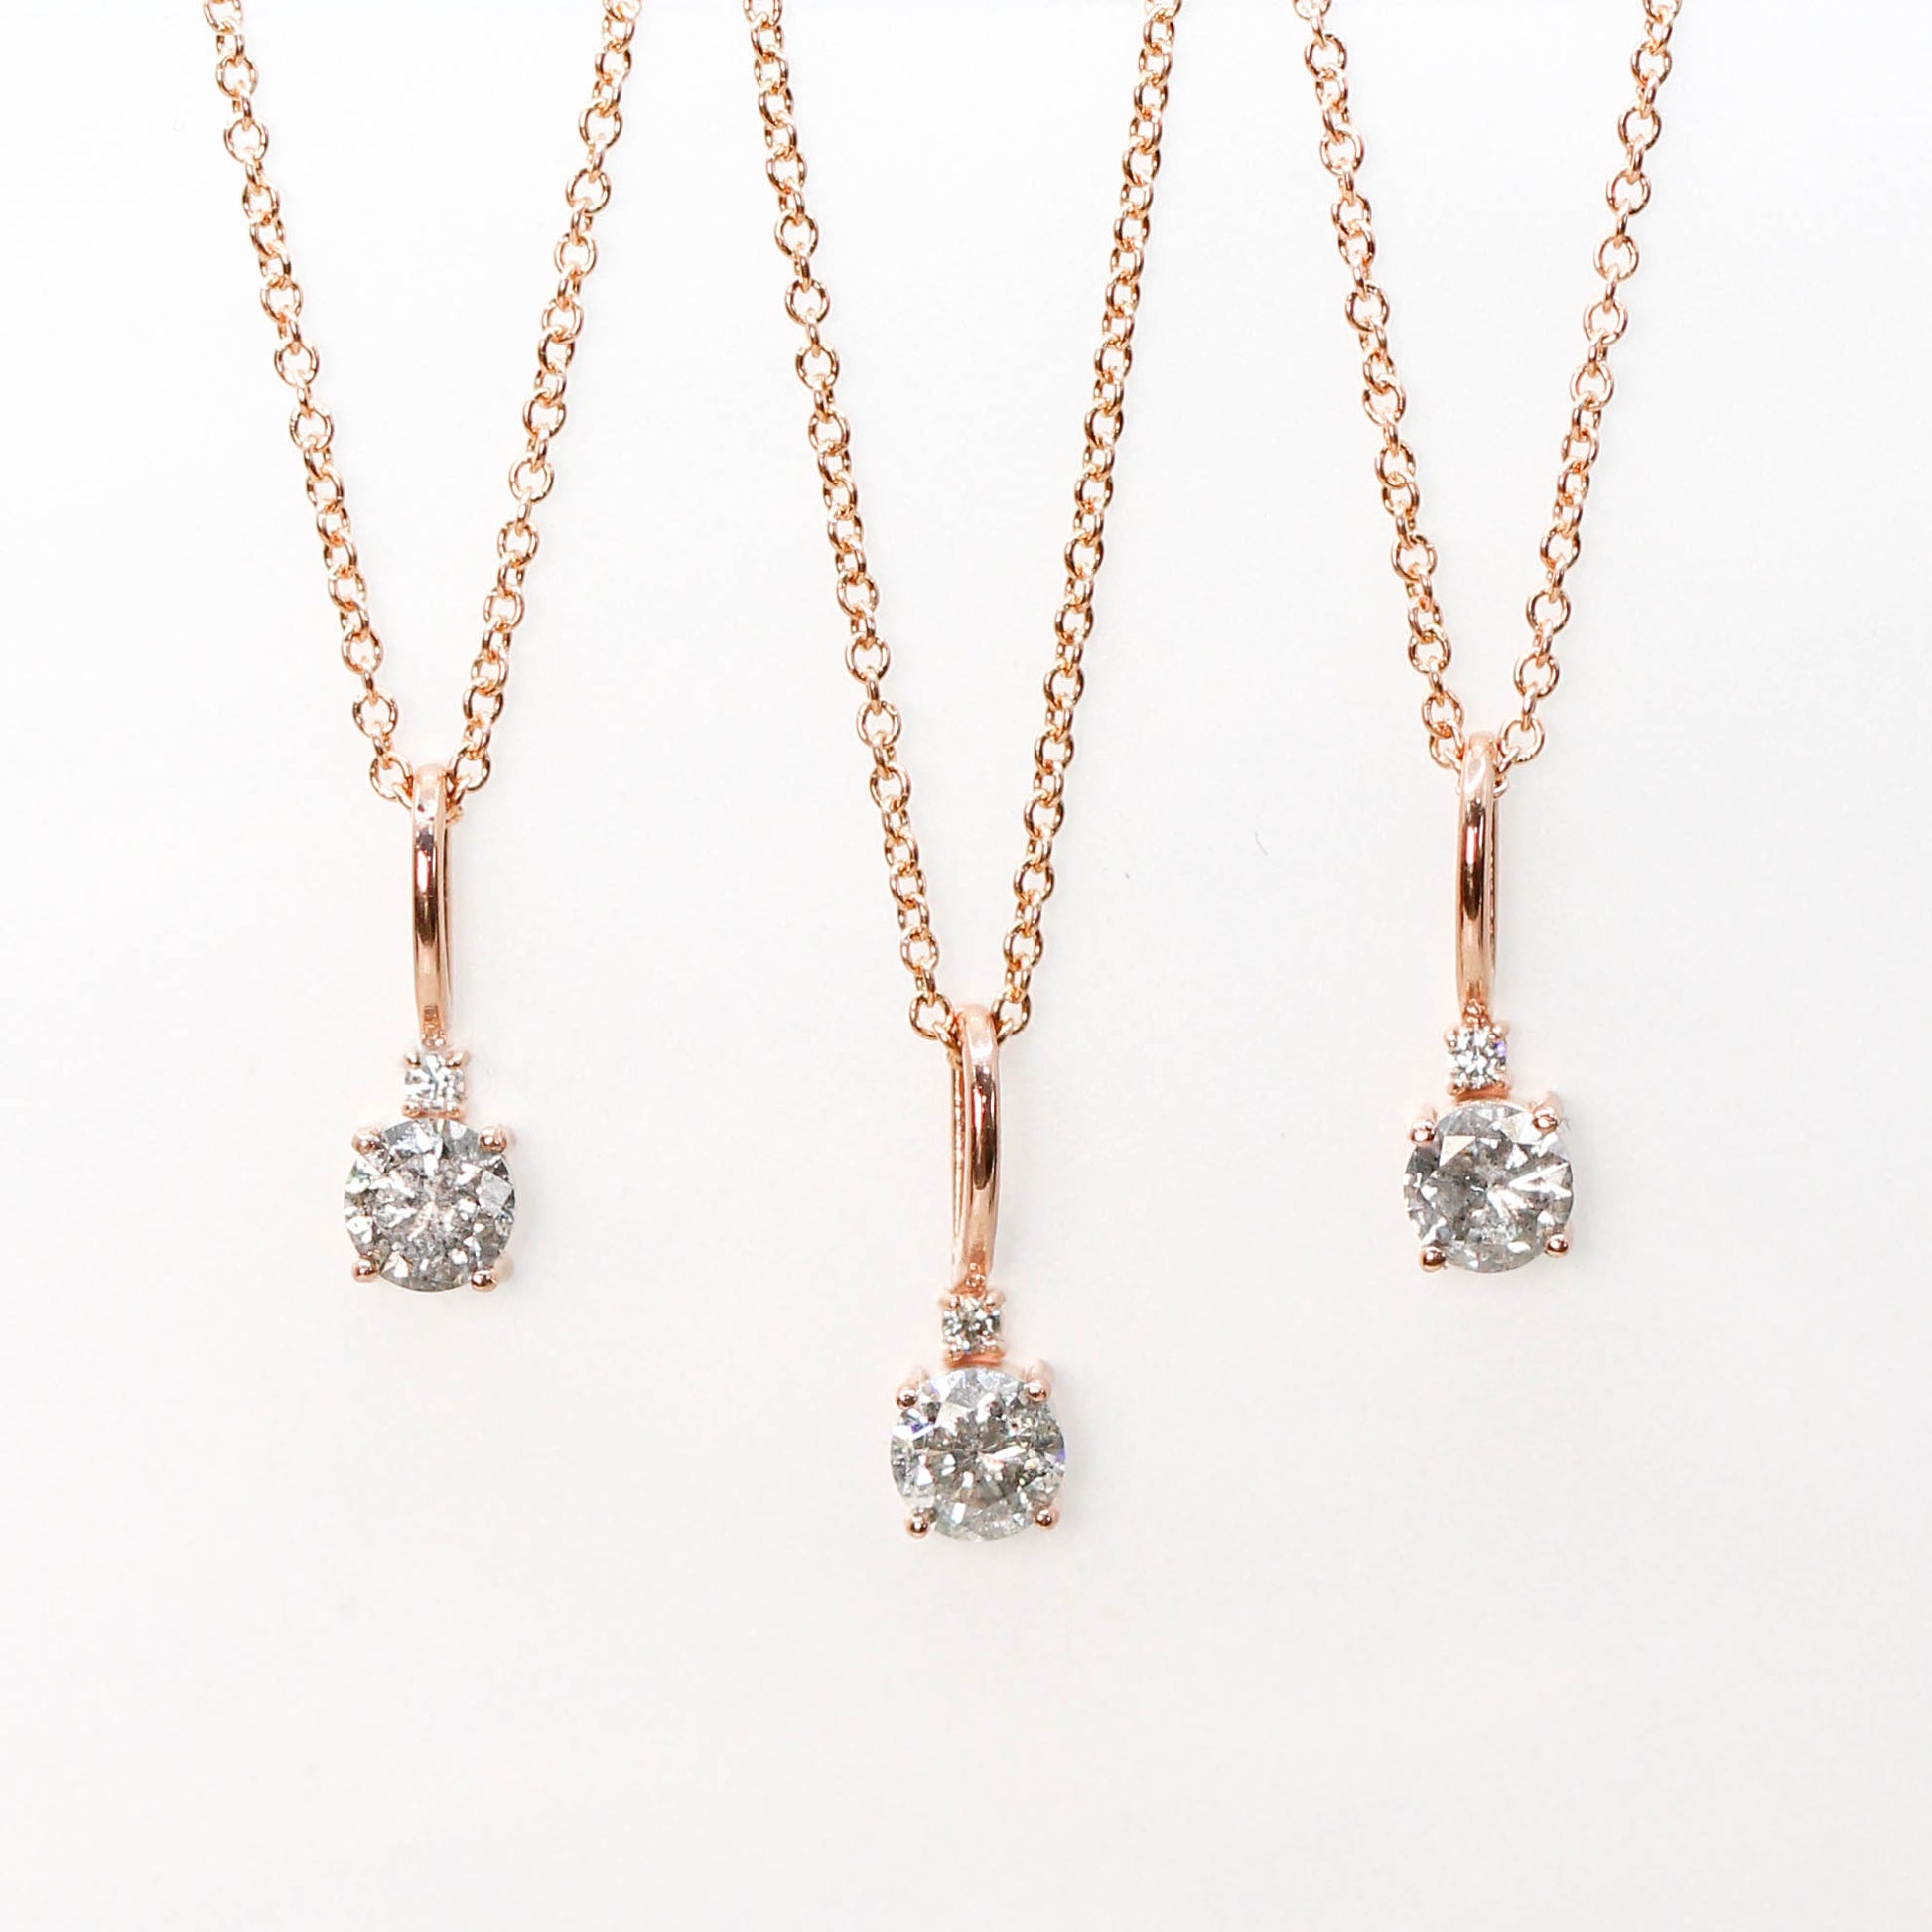 10k Rose Gold Round Celestial Diamond Pendant Necklace - Midwinter Co. Alternative Bridal Rings and Modern Fine Jewelry